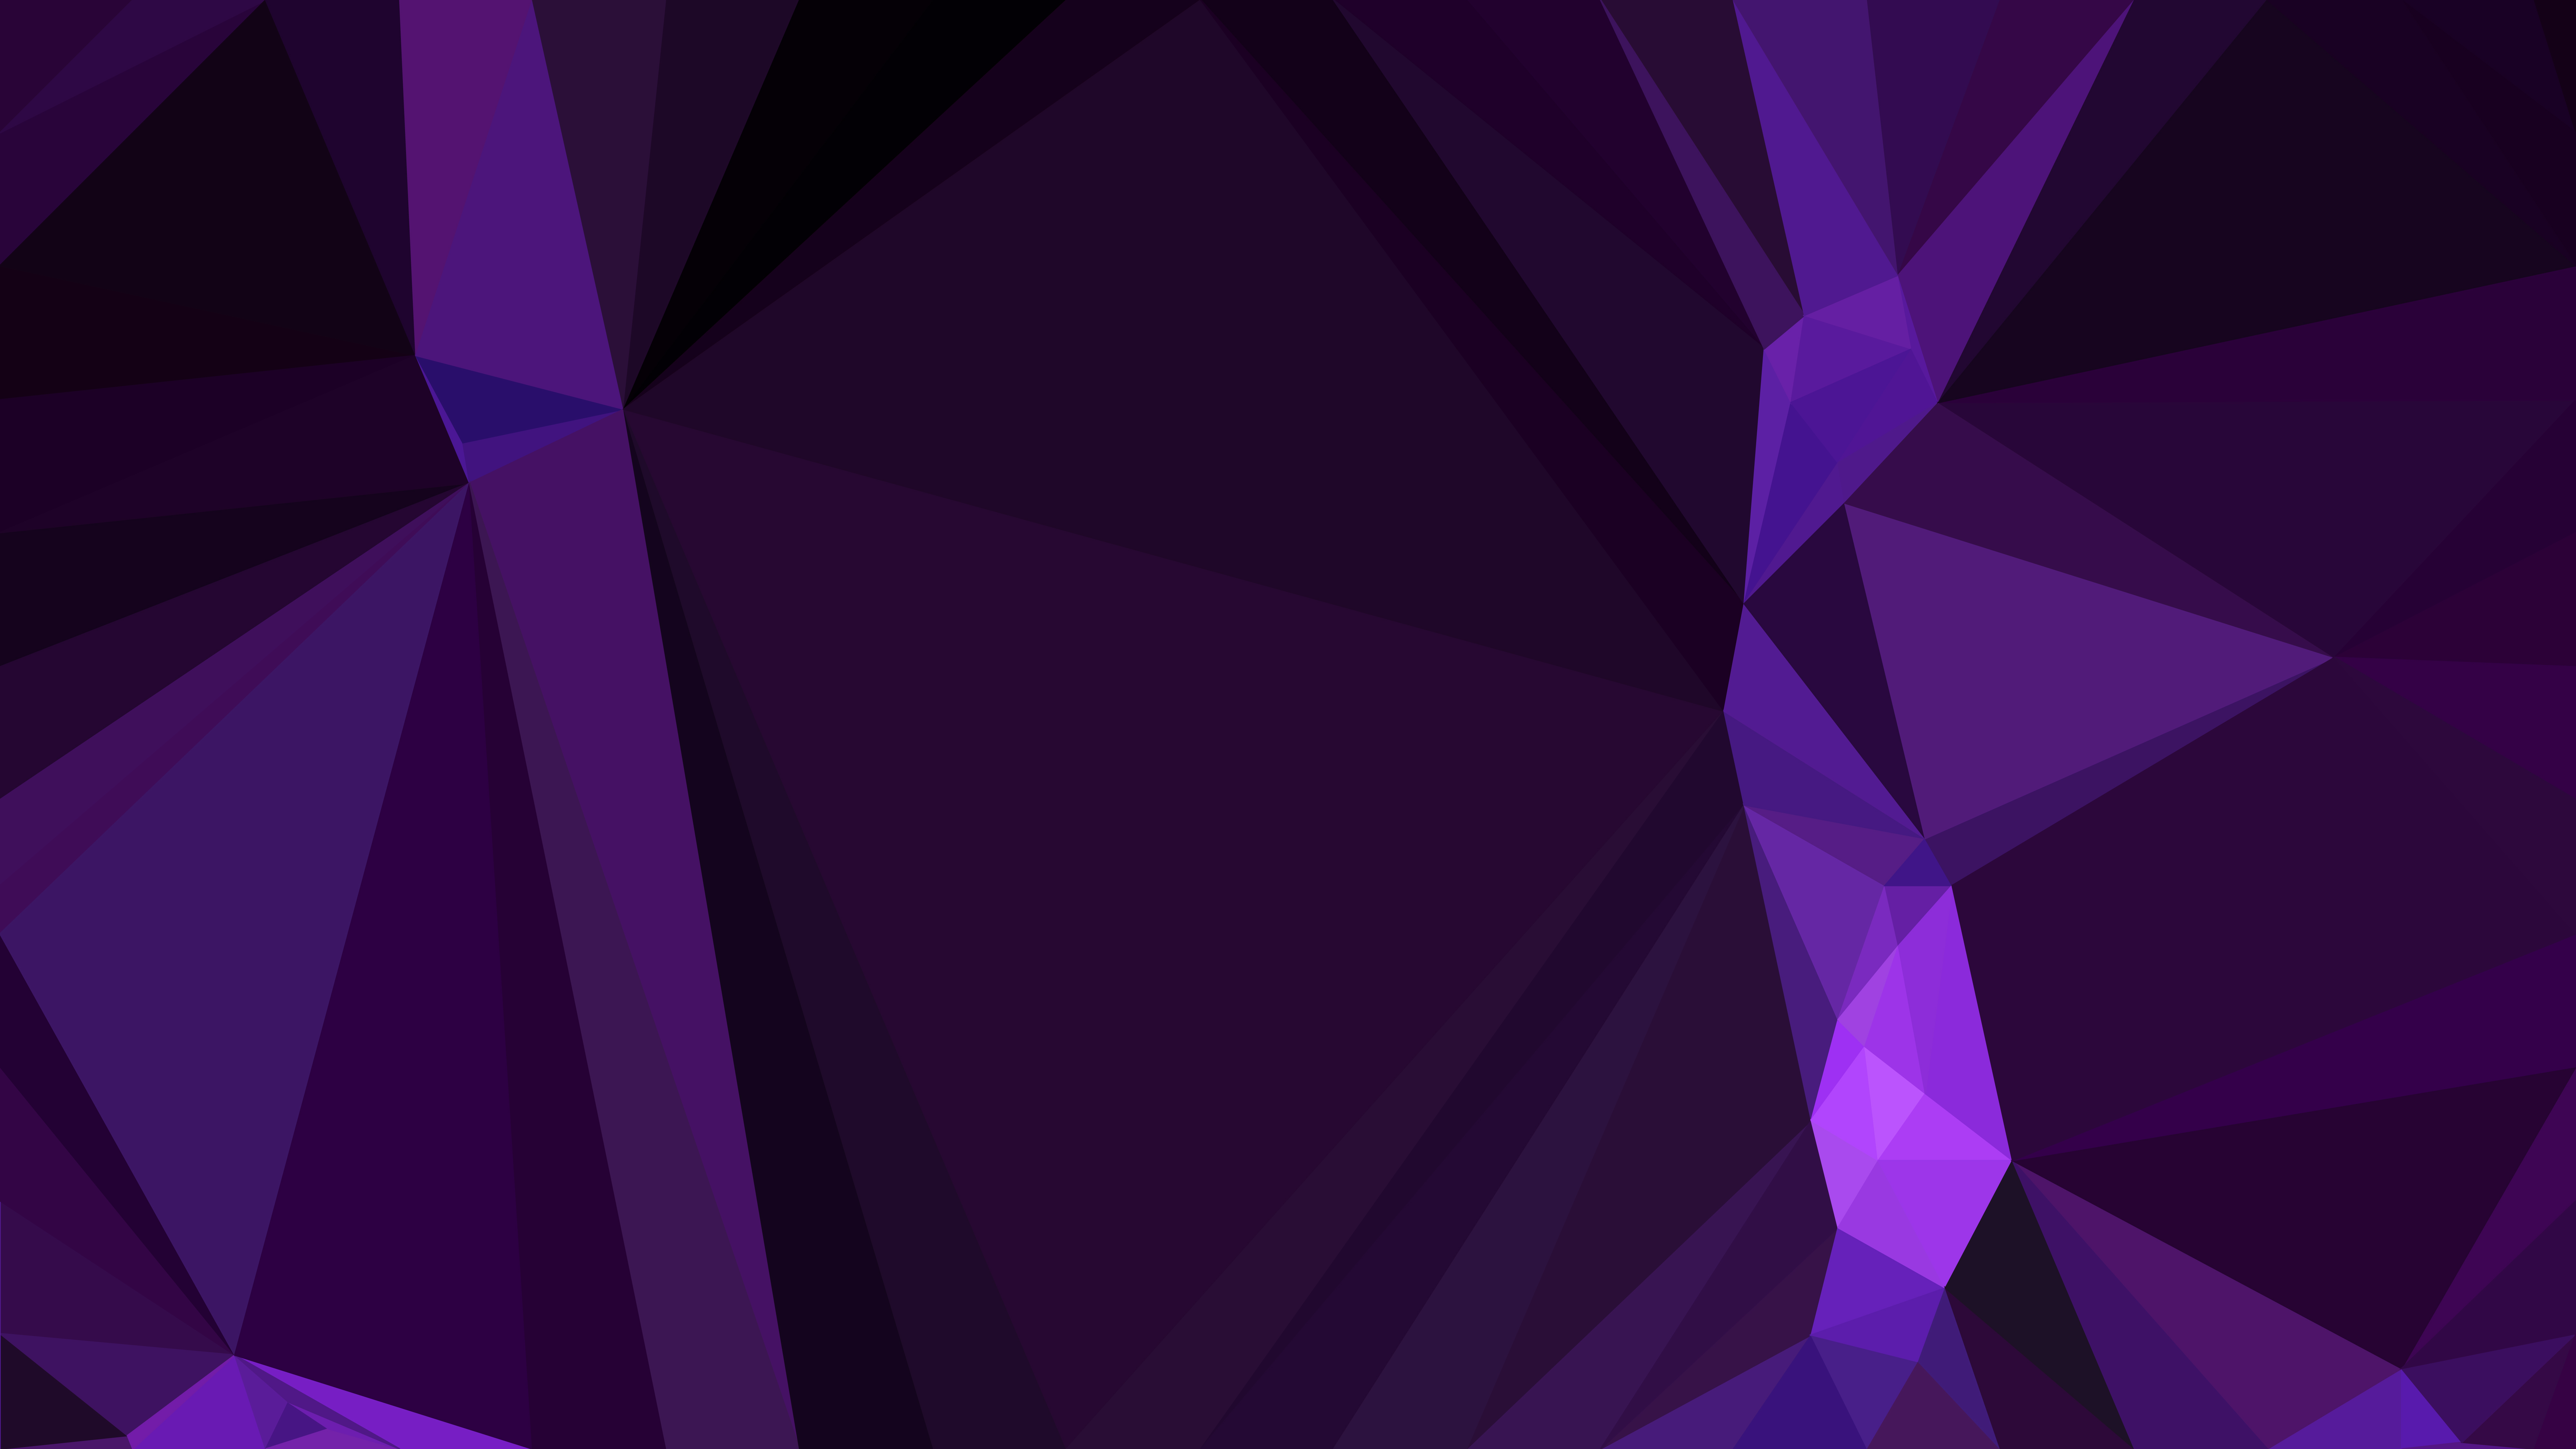 Abstract Cool Purple Geometric Shapes Background Vector Image